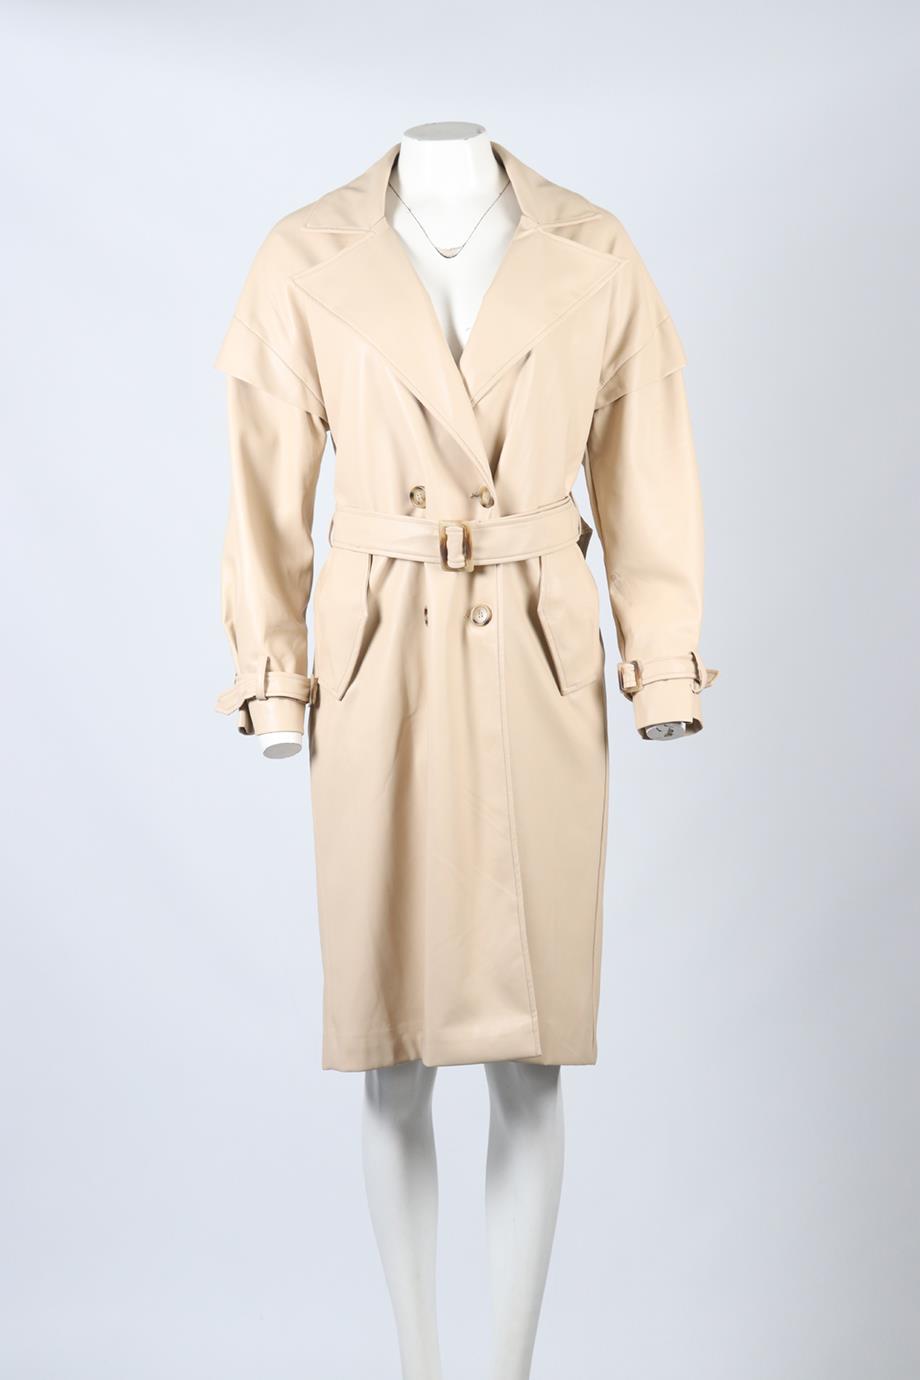 APPARIS BELTED DOUBLE BREASTED FAUX LEATHER TRENCH COAT XSMALL